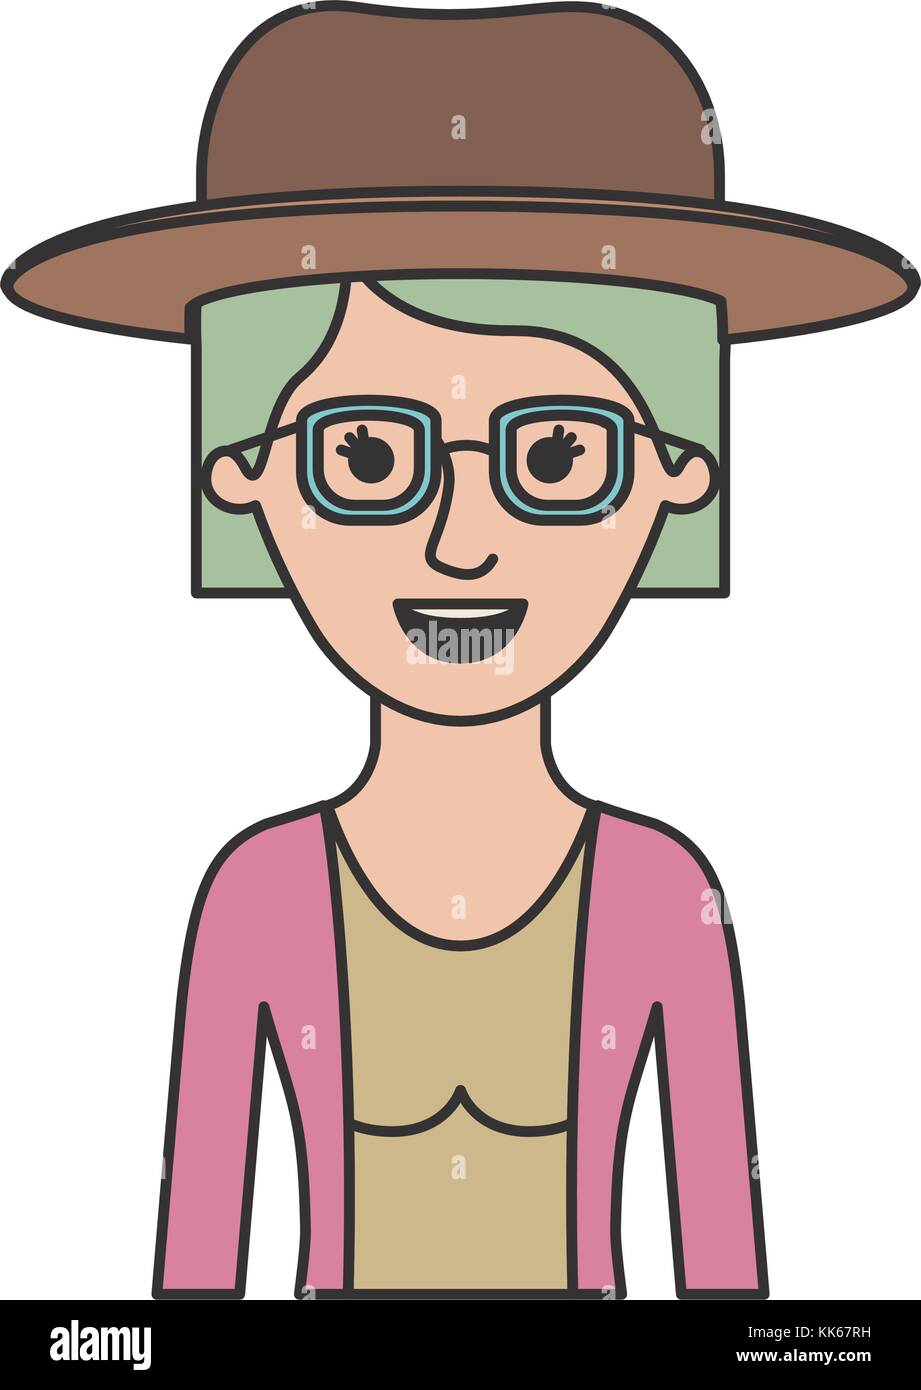 Woman Half Body With Hat And Glasses And Blouse With Jacket And